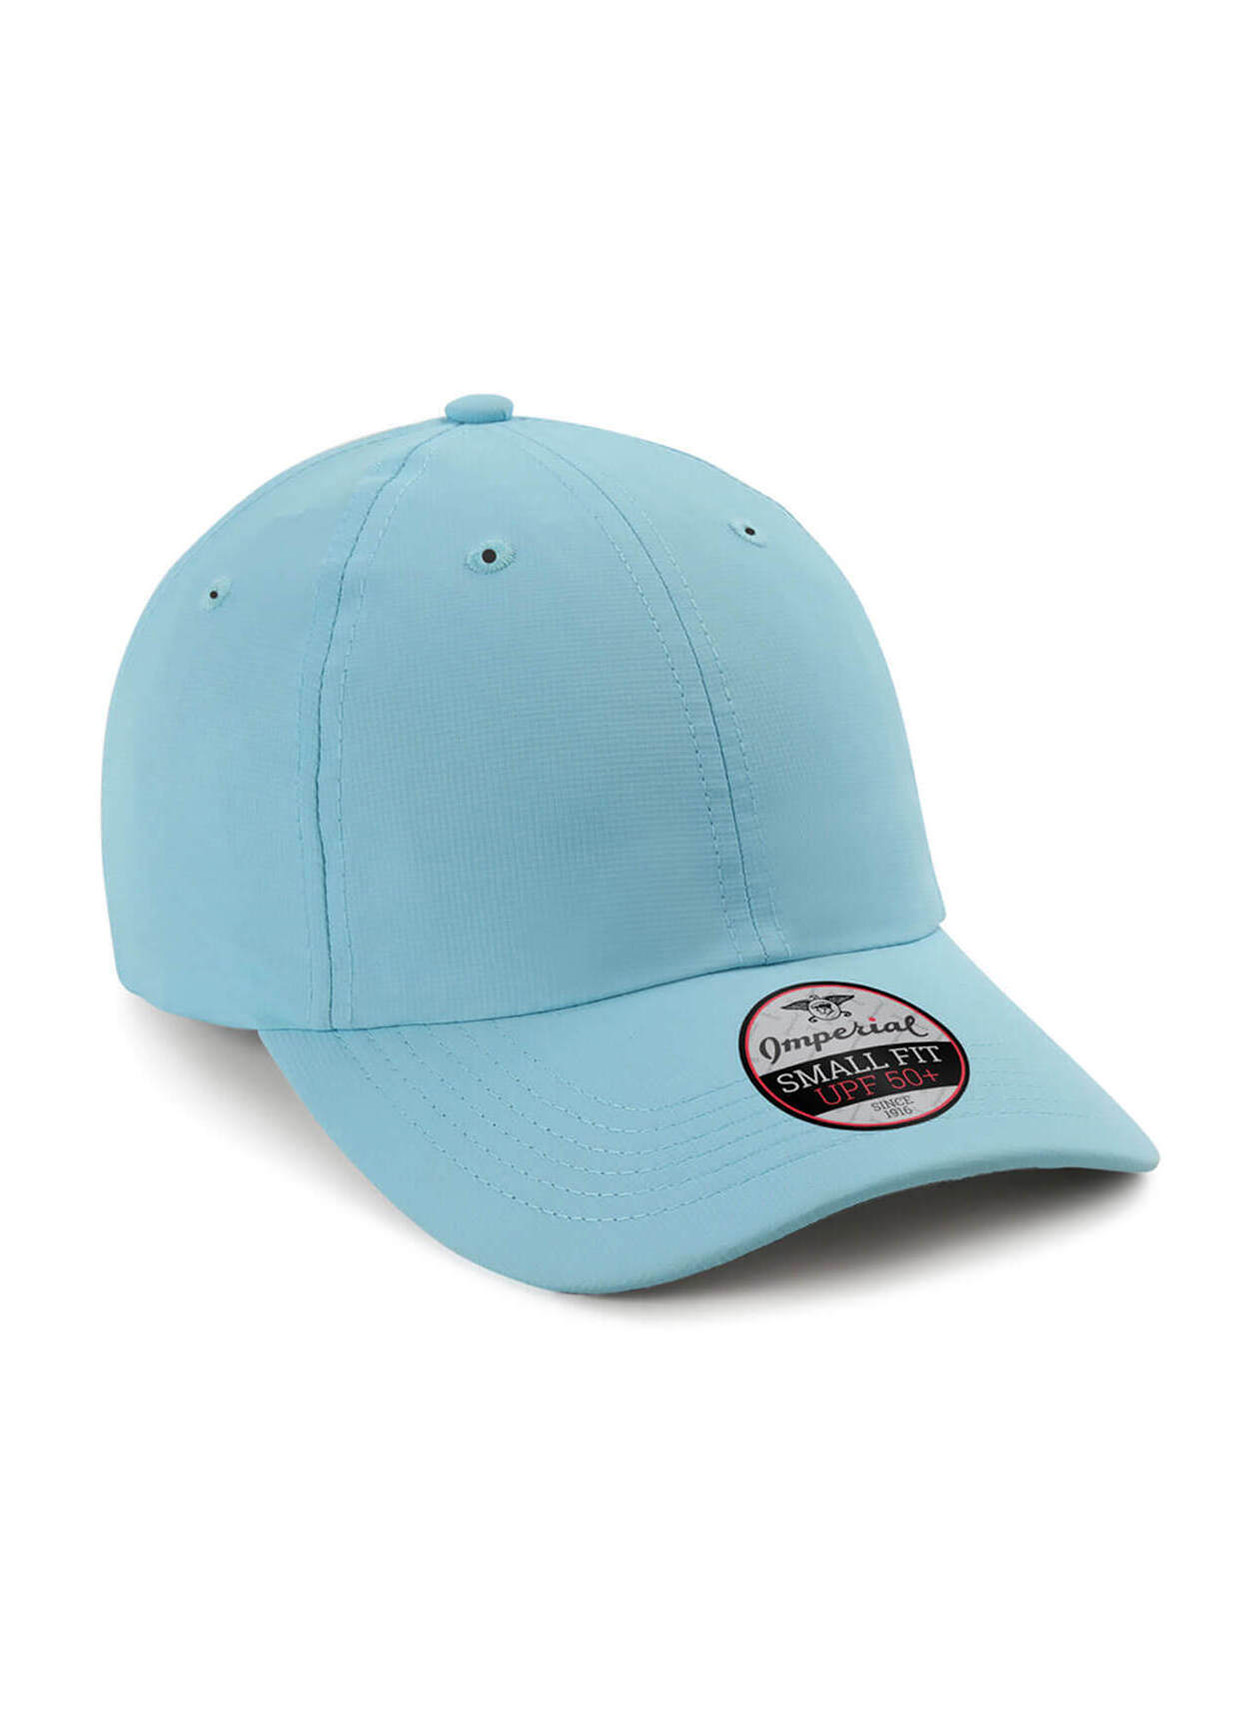 Imperial Light Blue Original Small Fit Performance Hat